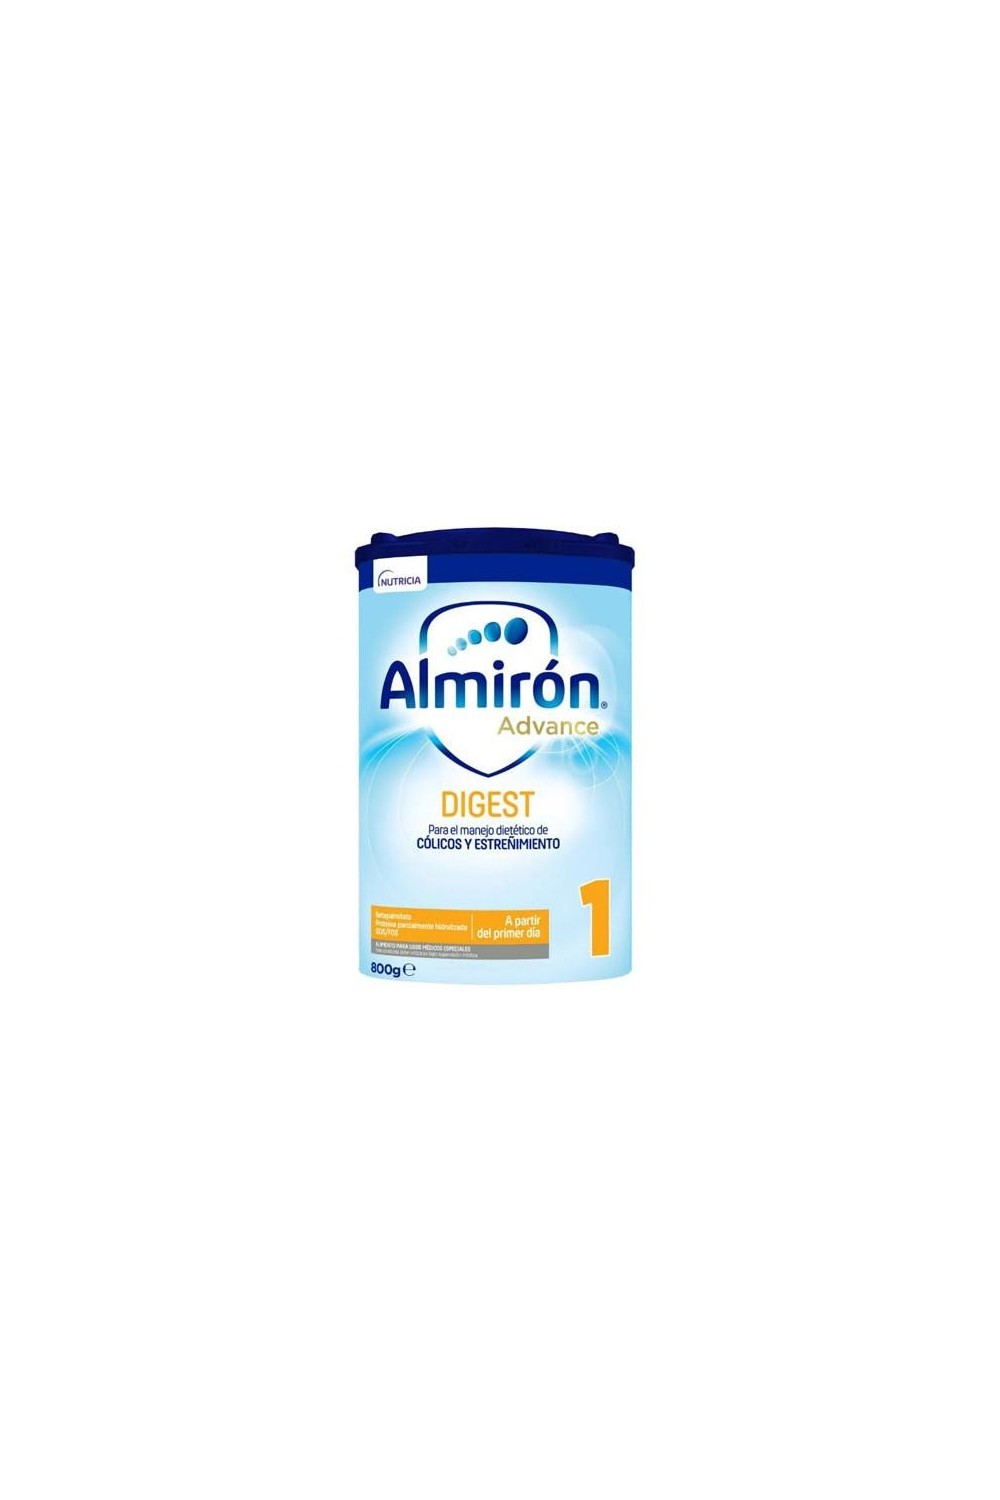 ALMIRÓN - Almirón Advance Digest 1 For Colic and Constipation 800g